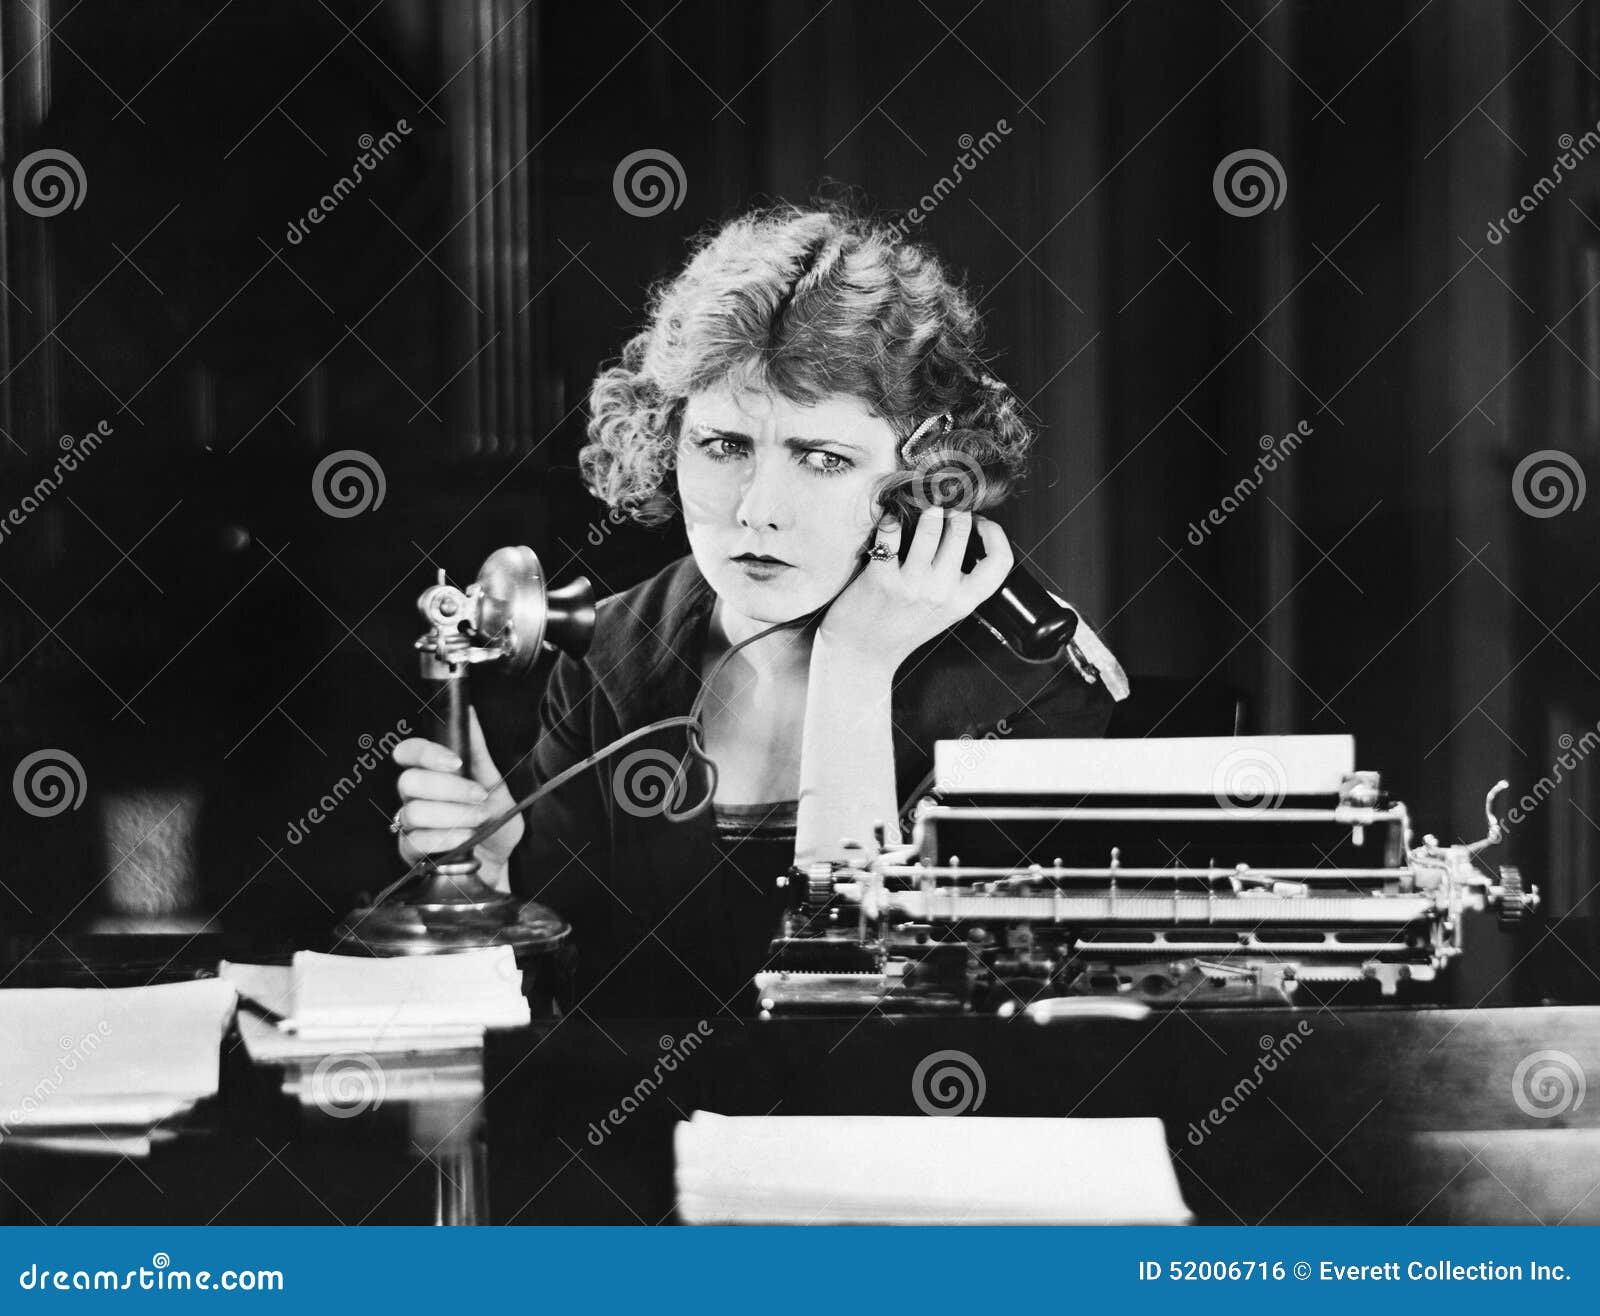 confused woman on telephone